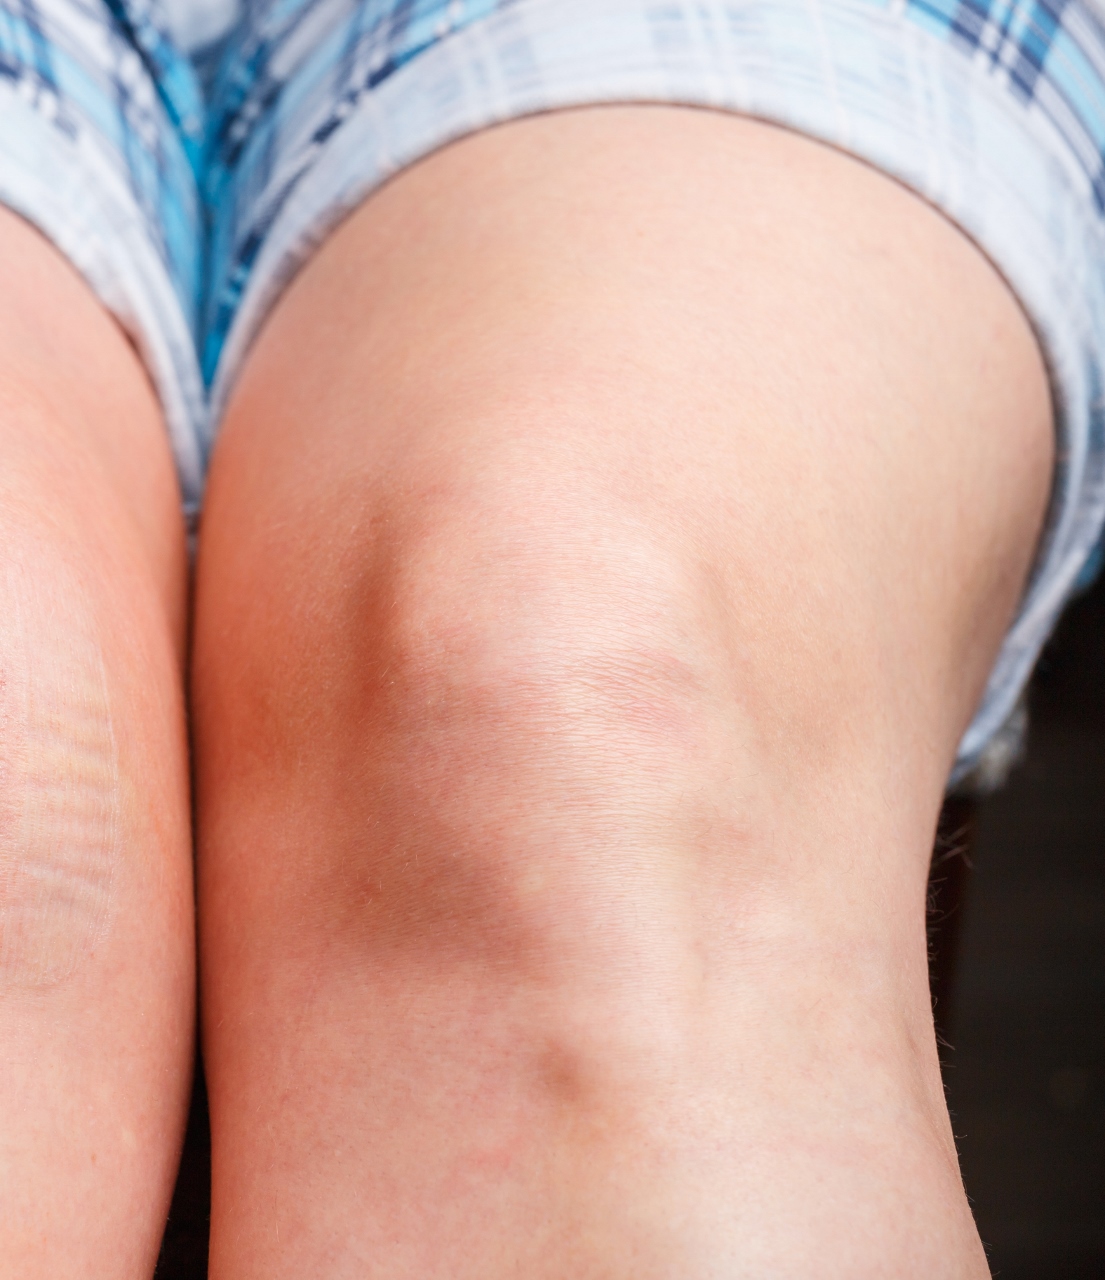 What Therapies are Available to Treat Dark Elbows and Knees?